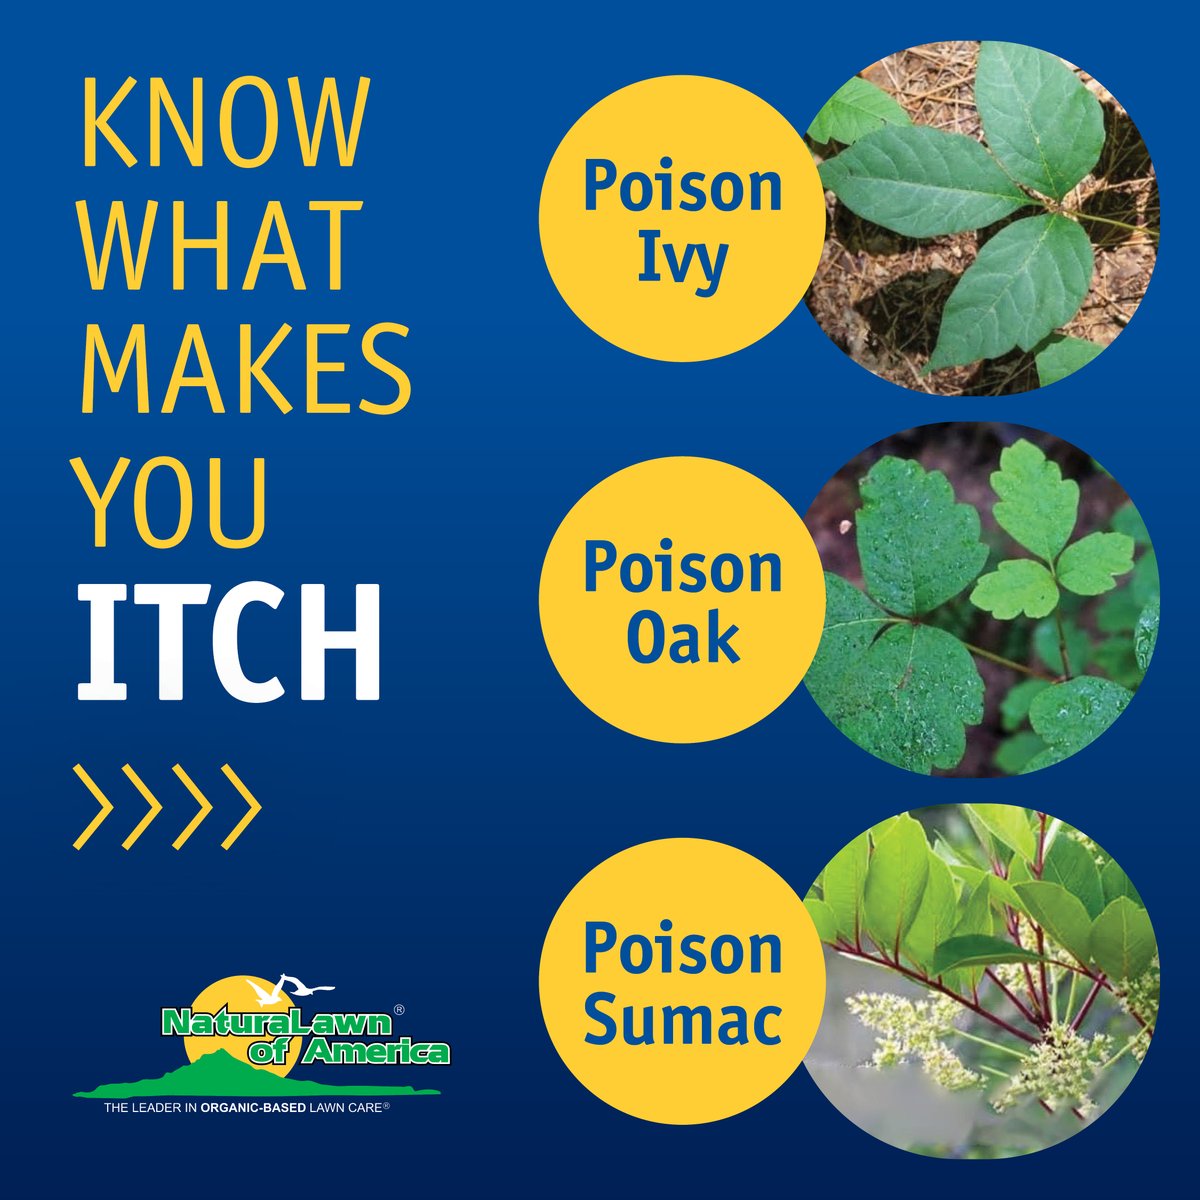 Know what makes you itch. If you come across any of these in your yard stir clear. Learn more: ow.ly/c92b50RsVUF #NaturaLawn #NaturaLawnofAmerica #NLA #PoisonPlants #EnvironmentallyFriendly #DIY #PoisonIvy #TipsAndTricks